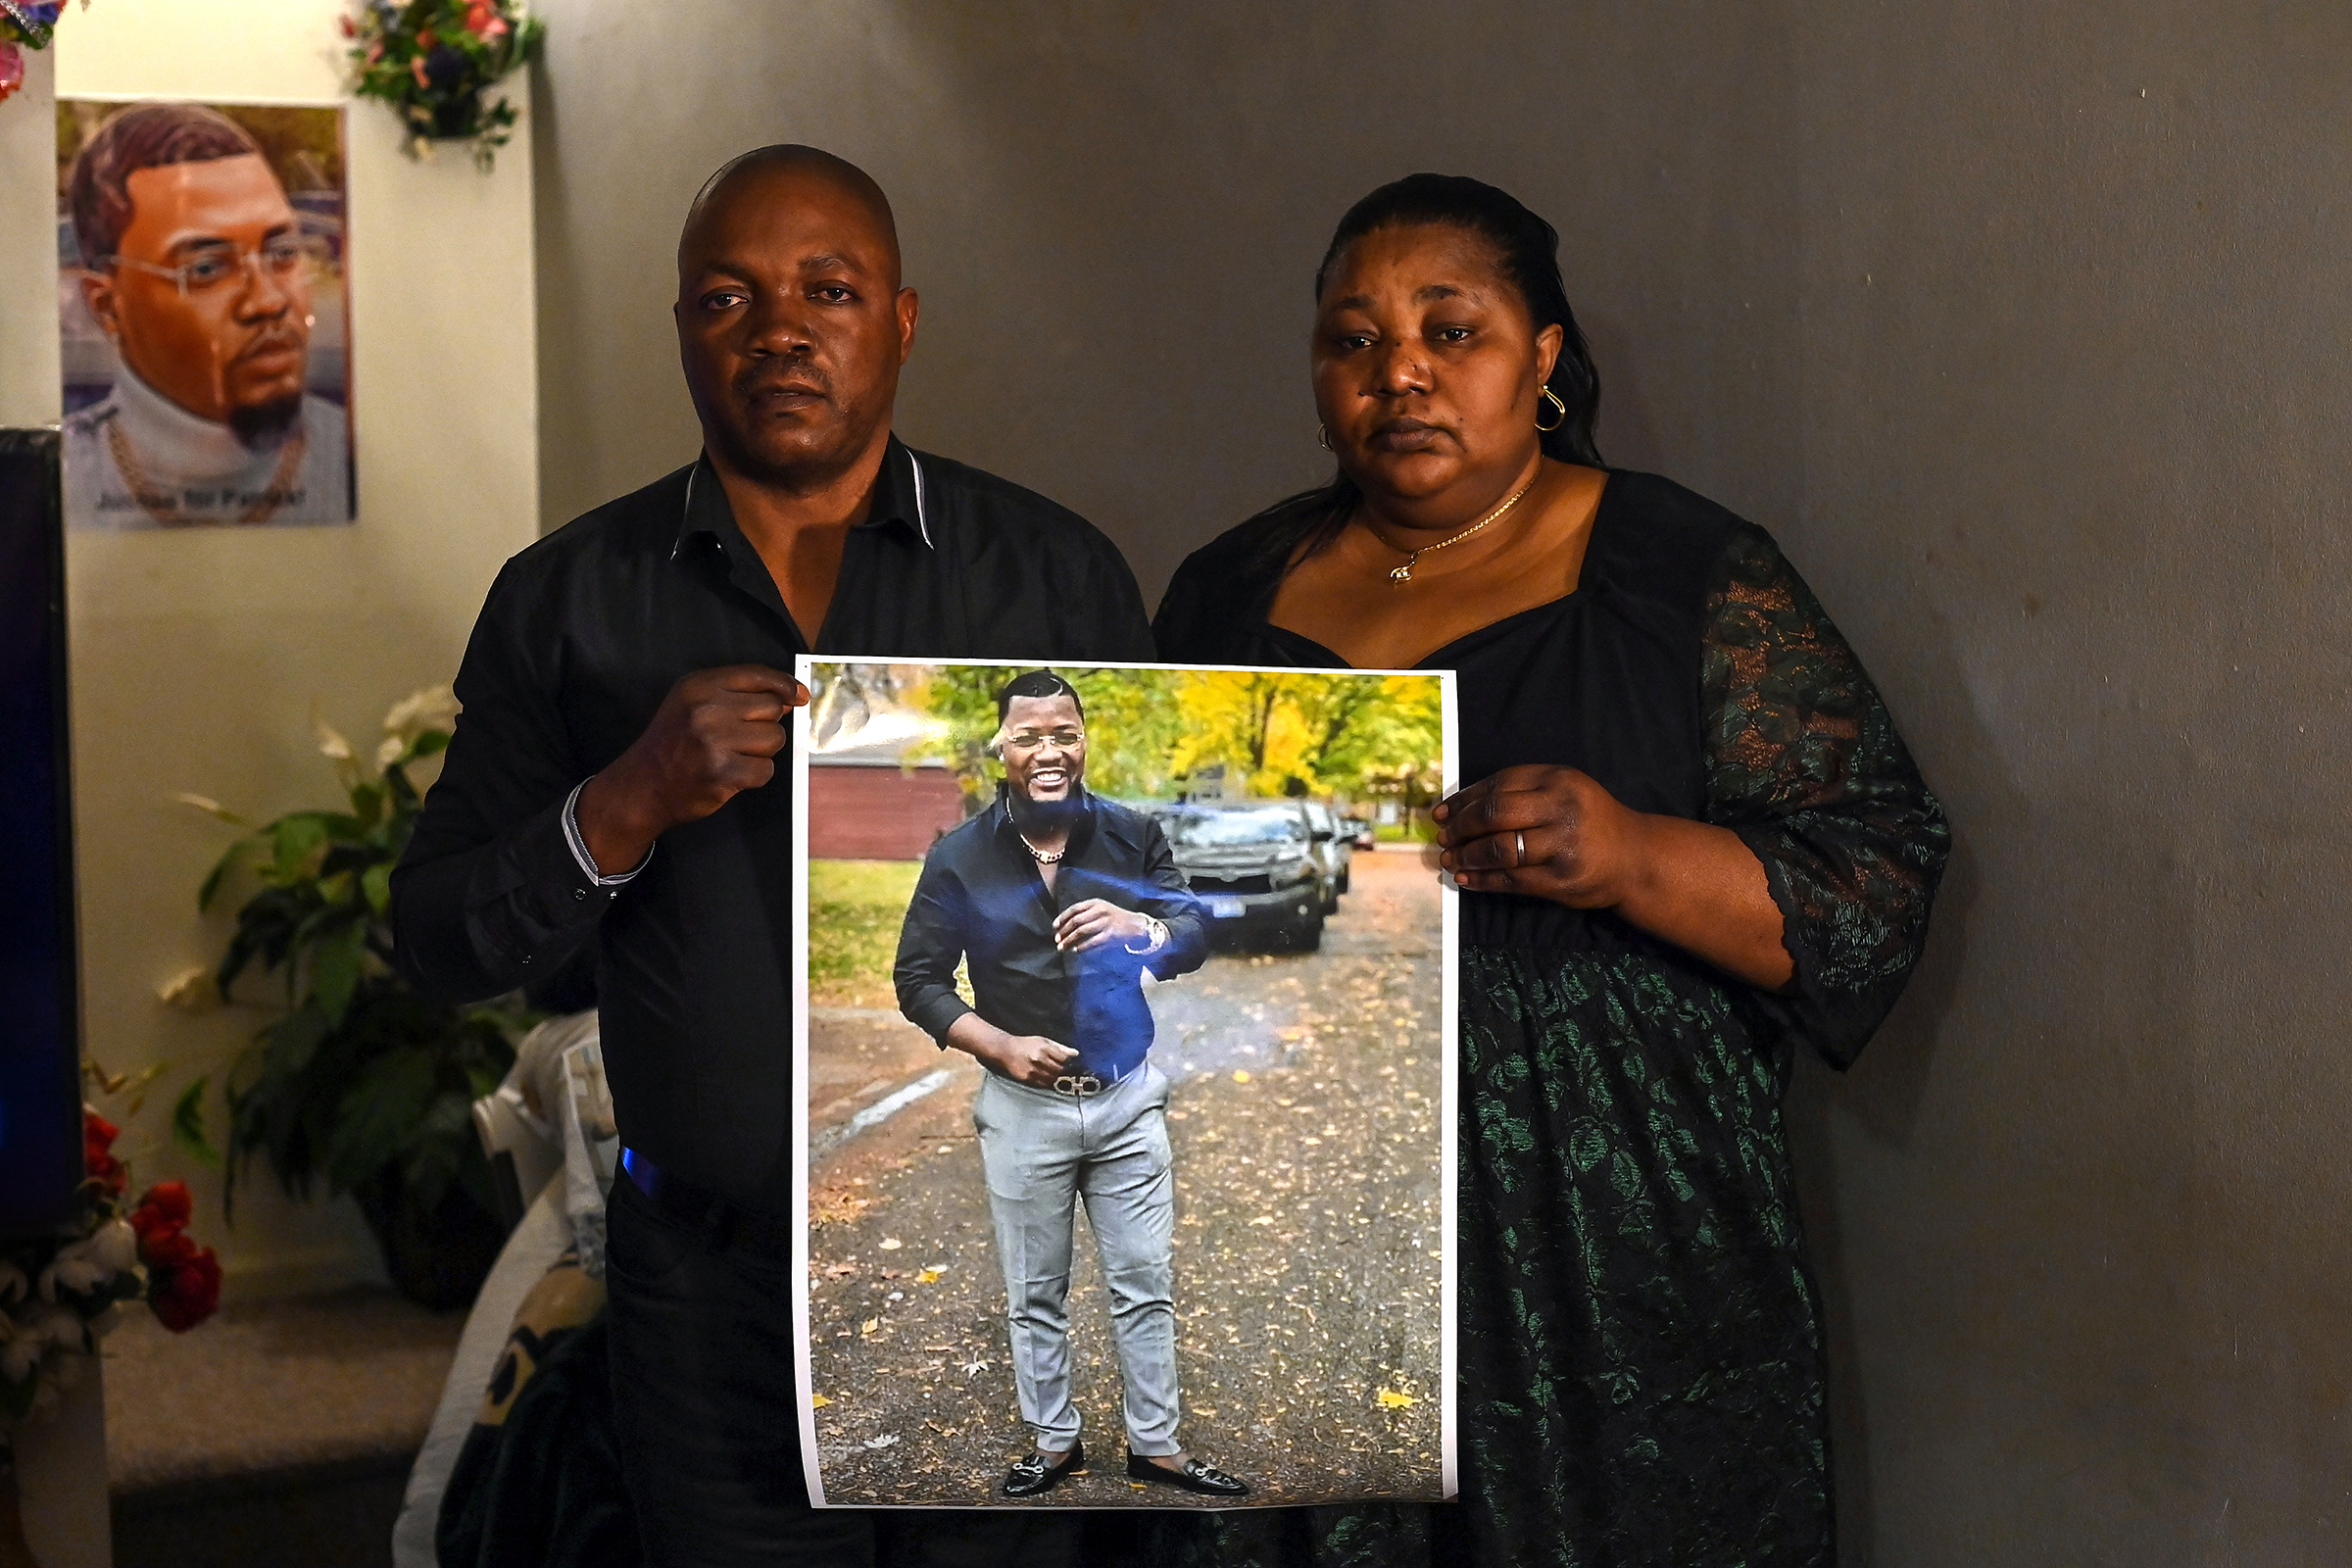 Patrick Lyoya's parents Peter Lyoya and Dorcas Lyoya pose for a portrait as they hold a photo of their son at their home on April 15, 2022 in Lansing, Mich. (Joshua Lott—The Washington Post/Getty Images)